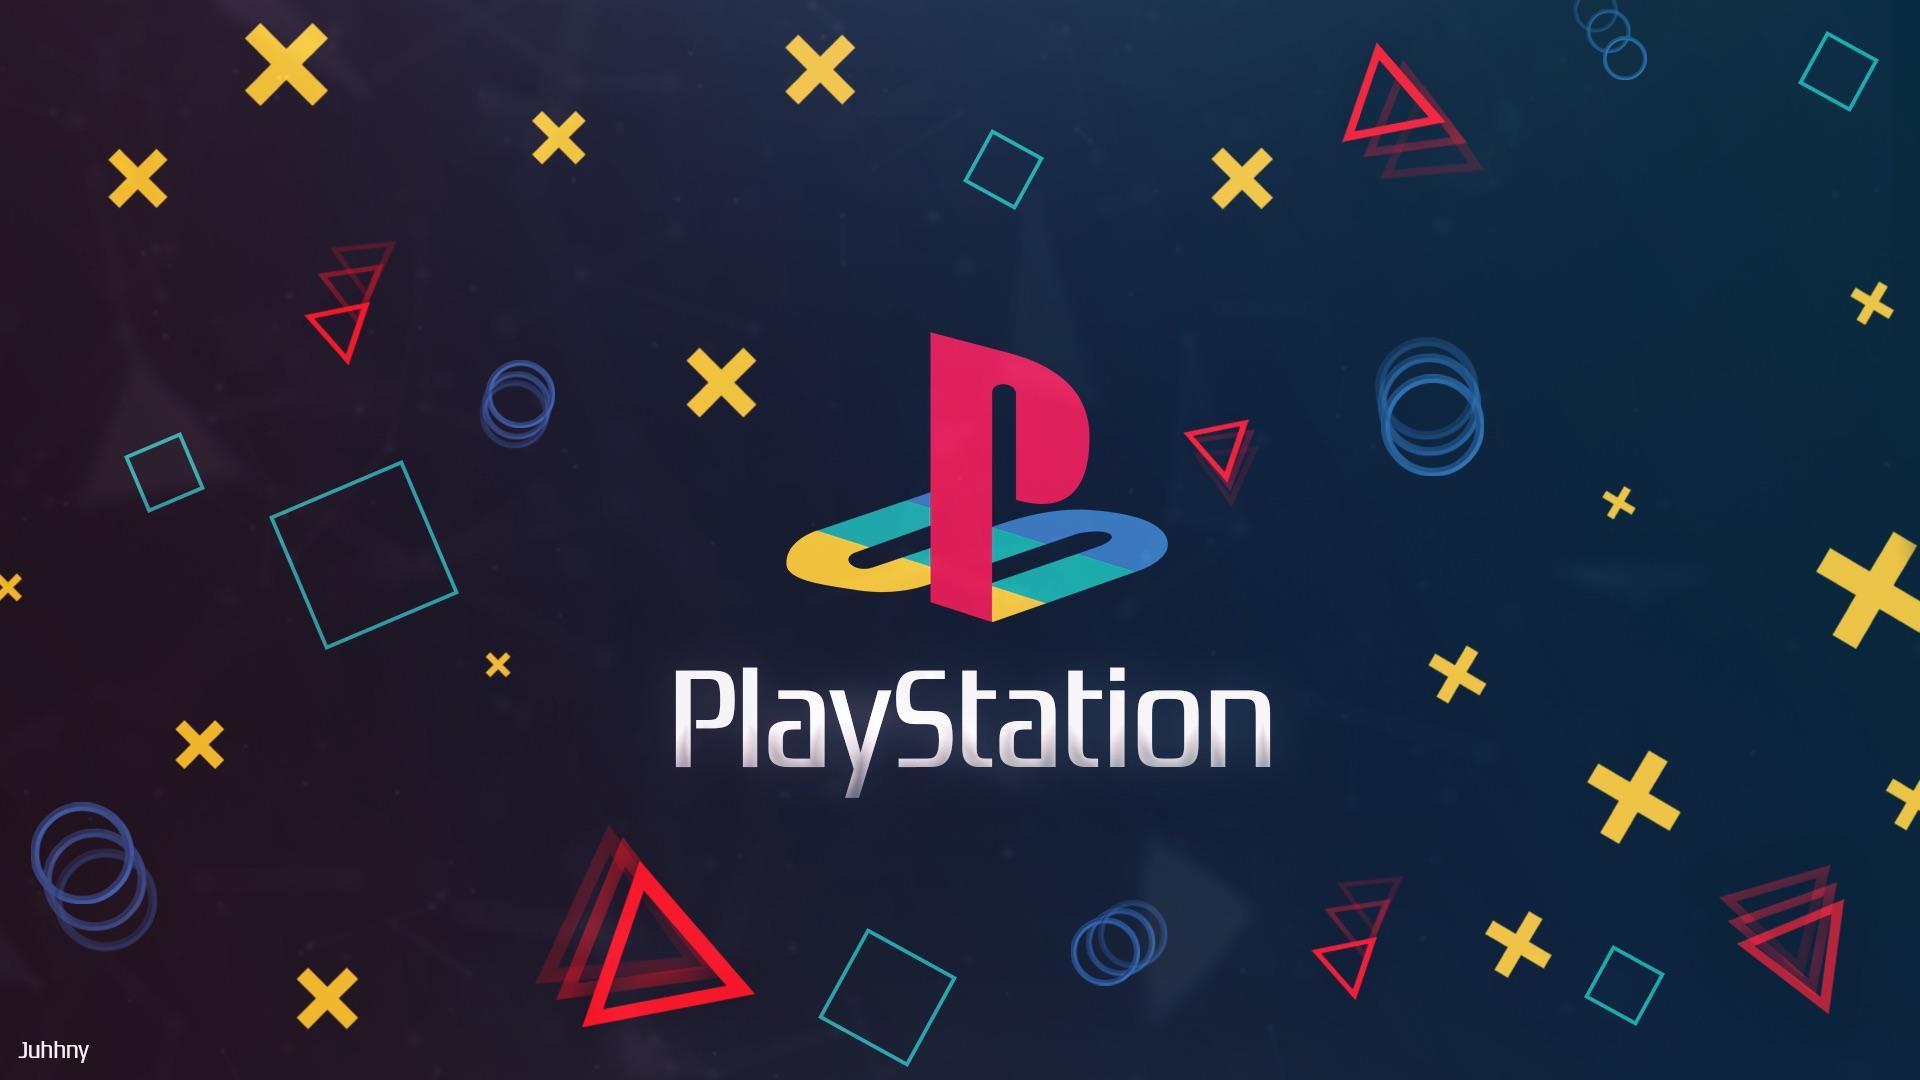 PlayStation Wallpaper design! Hope you guys like it!